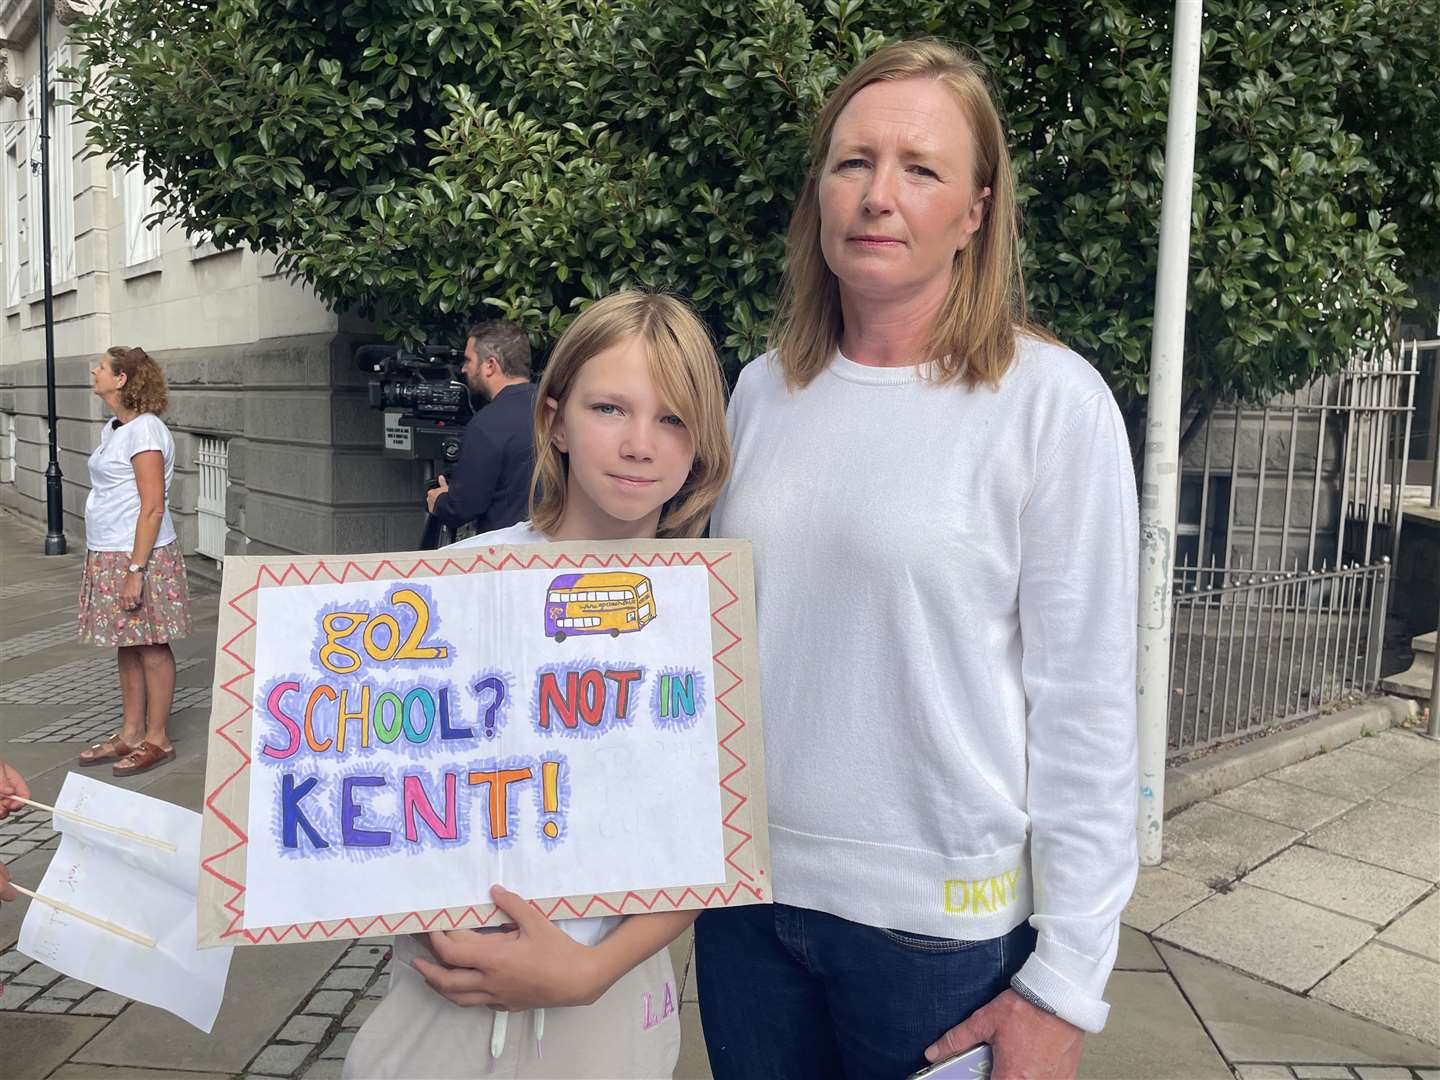 Jane Sinclair, right, and her daughter were outside County Hall in Maidstone to protest against bus cuts